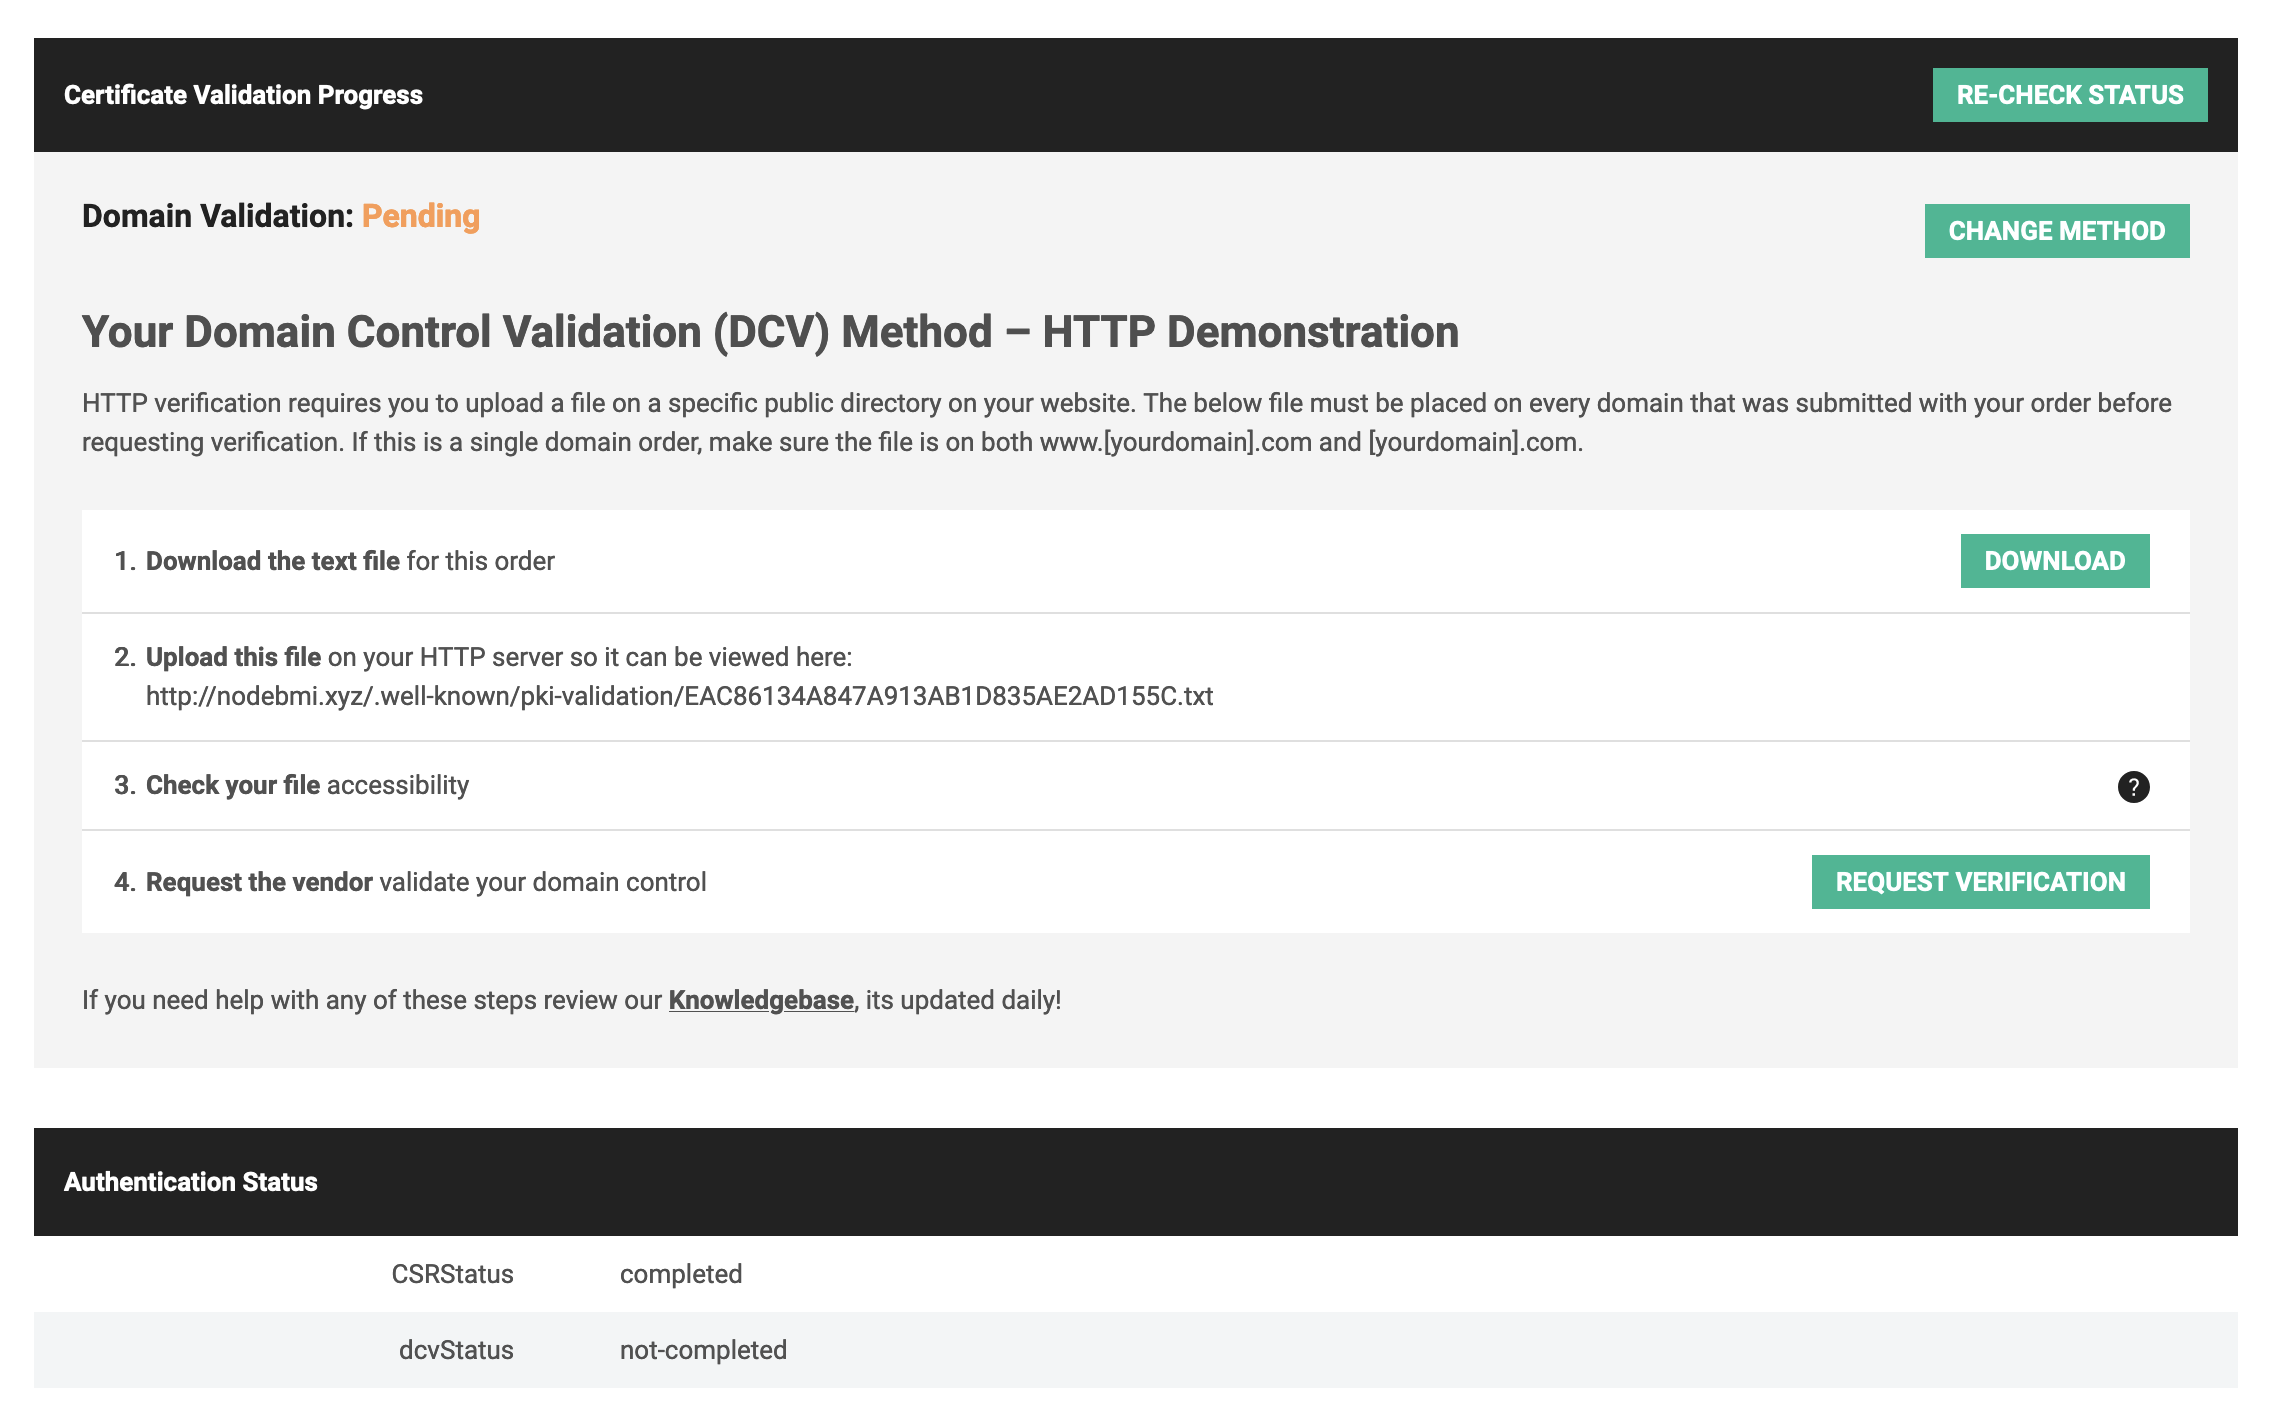 Instruction to perform the domain validation.